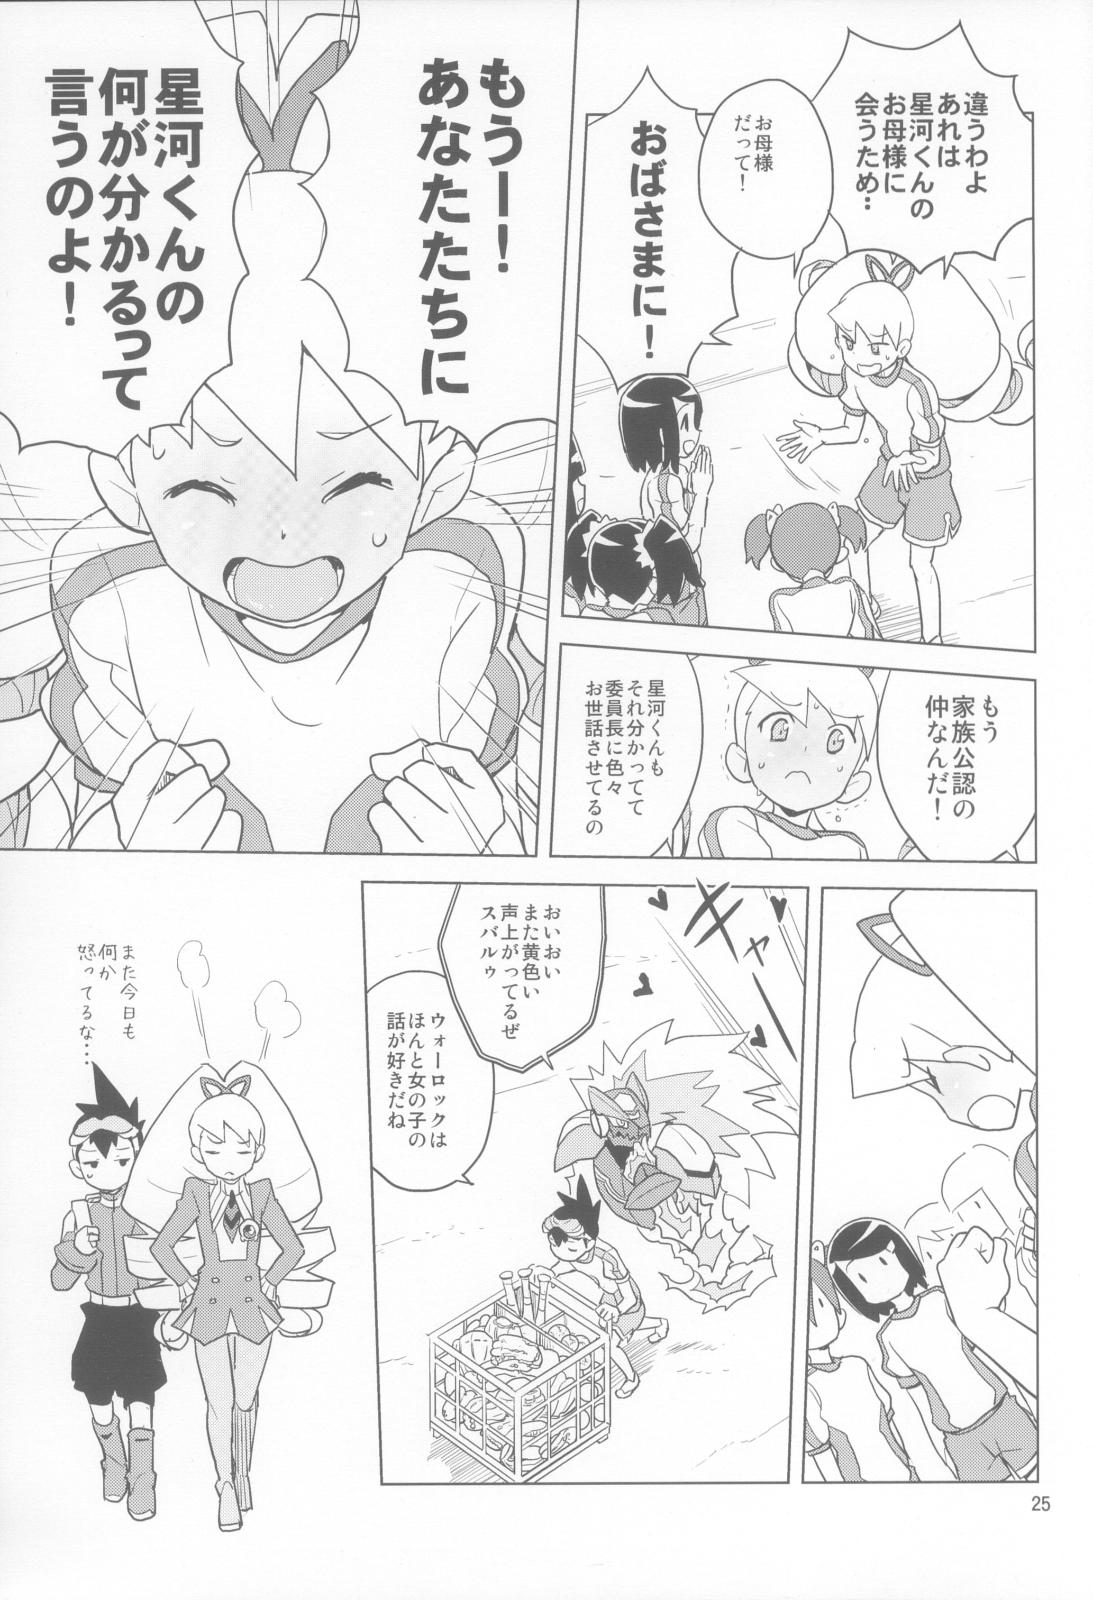 Anime LUNATIC SUMMER - Mega man star force Party - Page 25